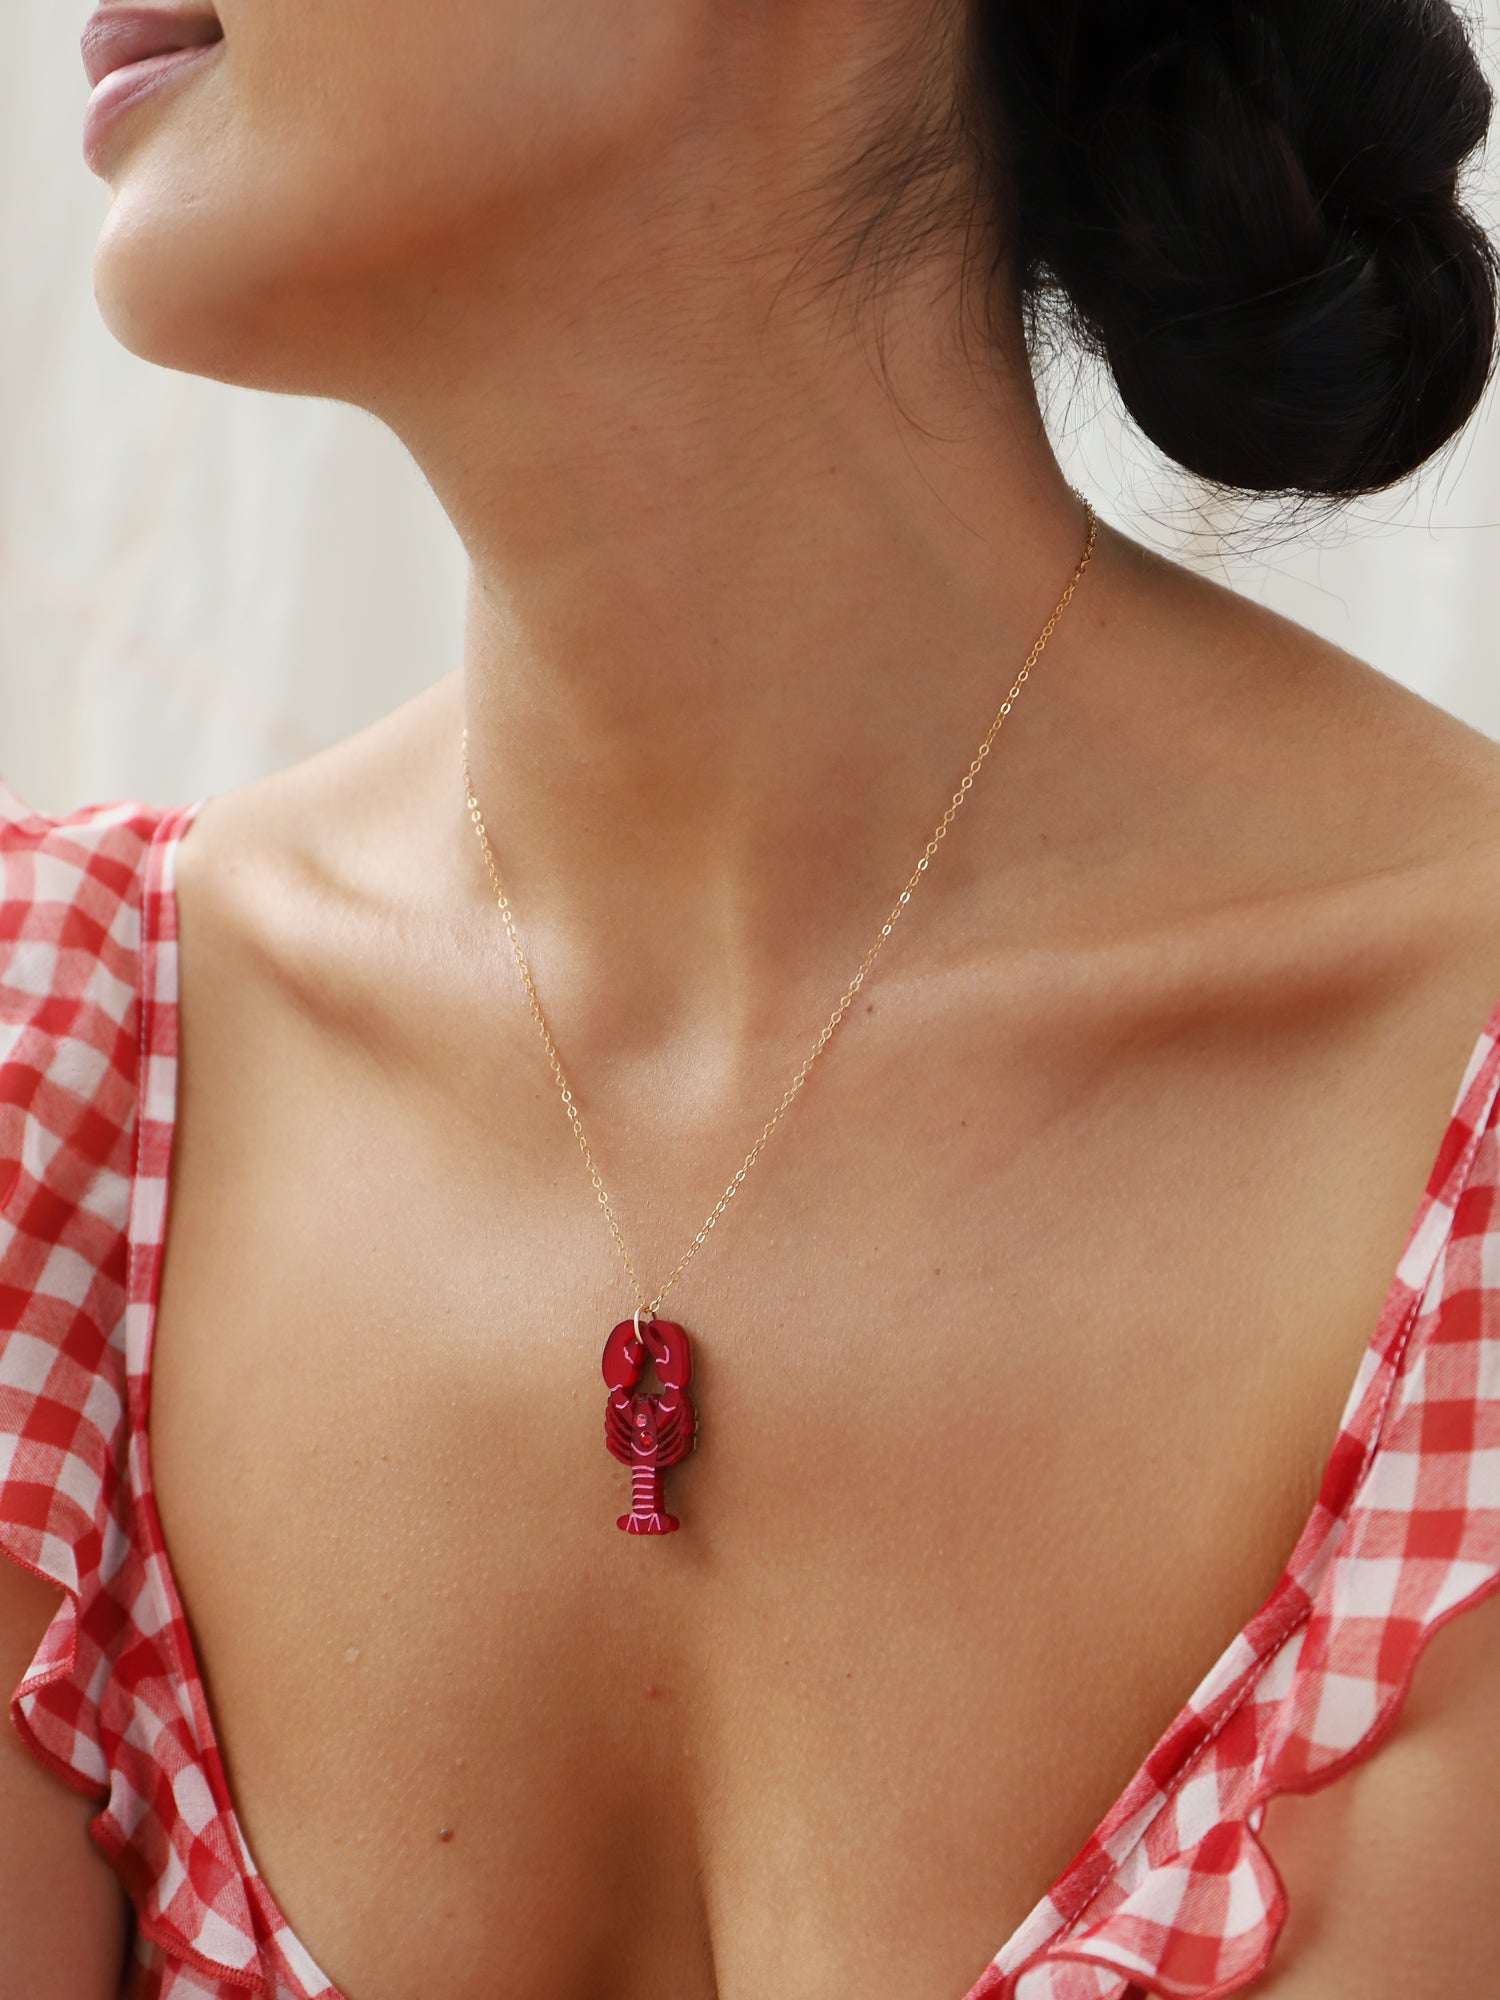  Red lobster necklace. Made from acrylic with high quality glass crystals and 14k gold-filled findings & chain. Handmade in the UK by Wolf & Moon.